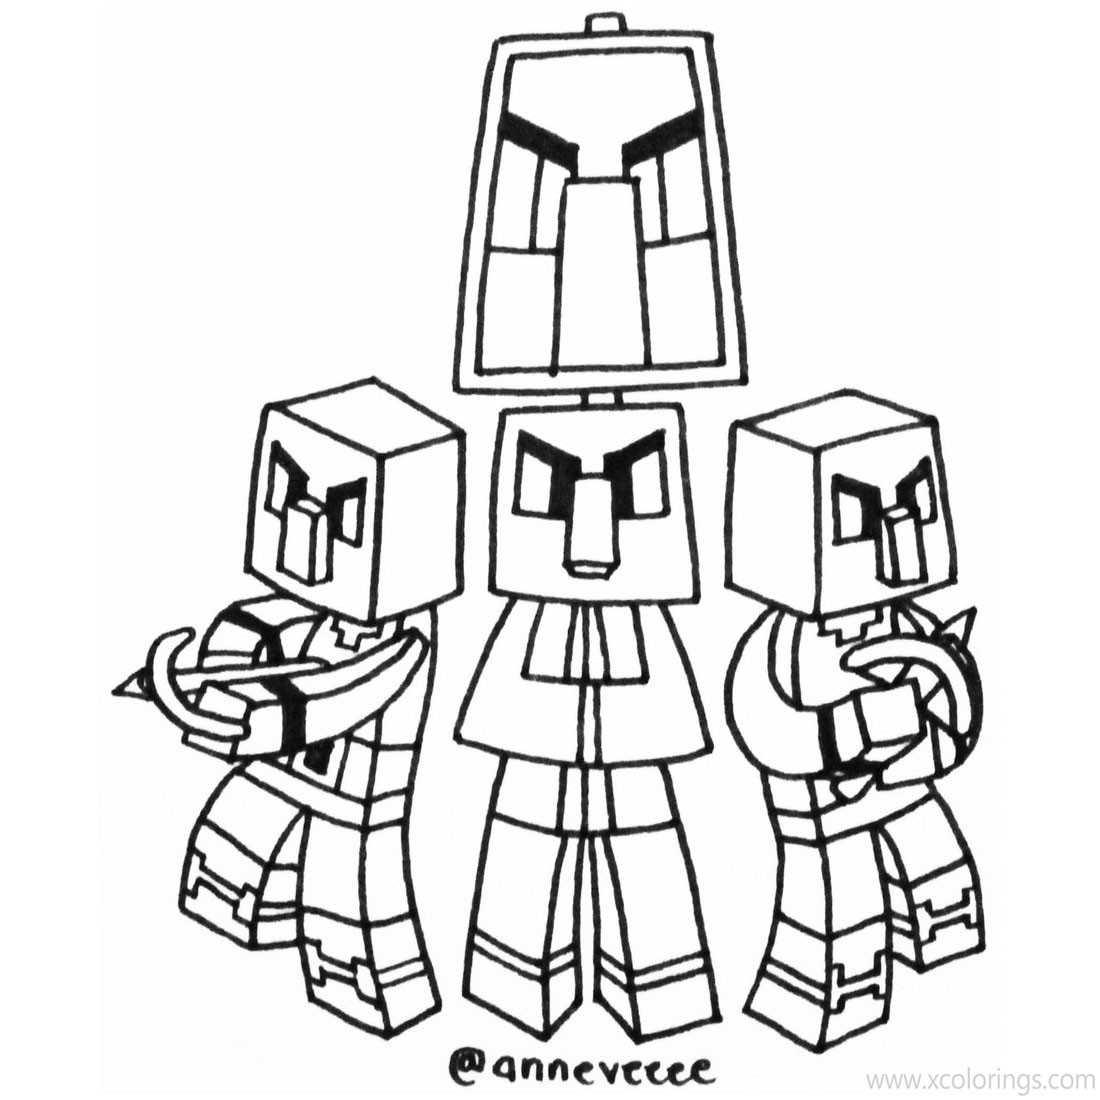 Free Minecraft Pillager Coloring Pages Fan Fiction printable